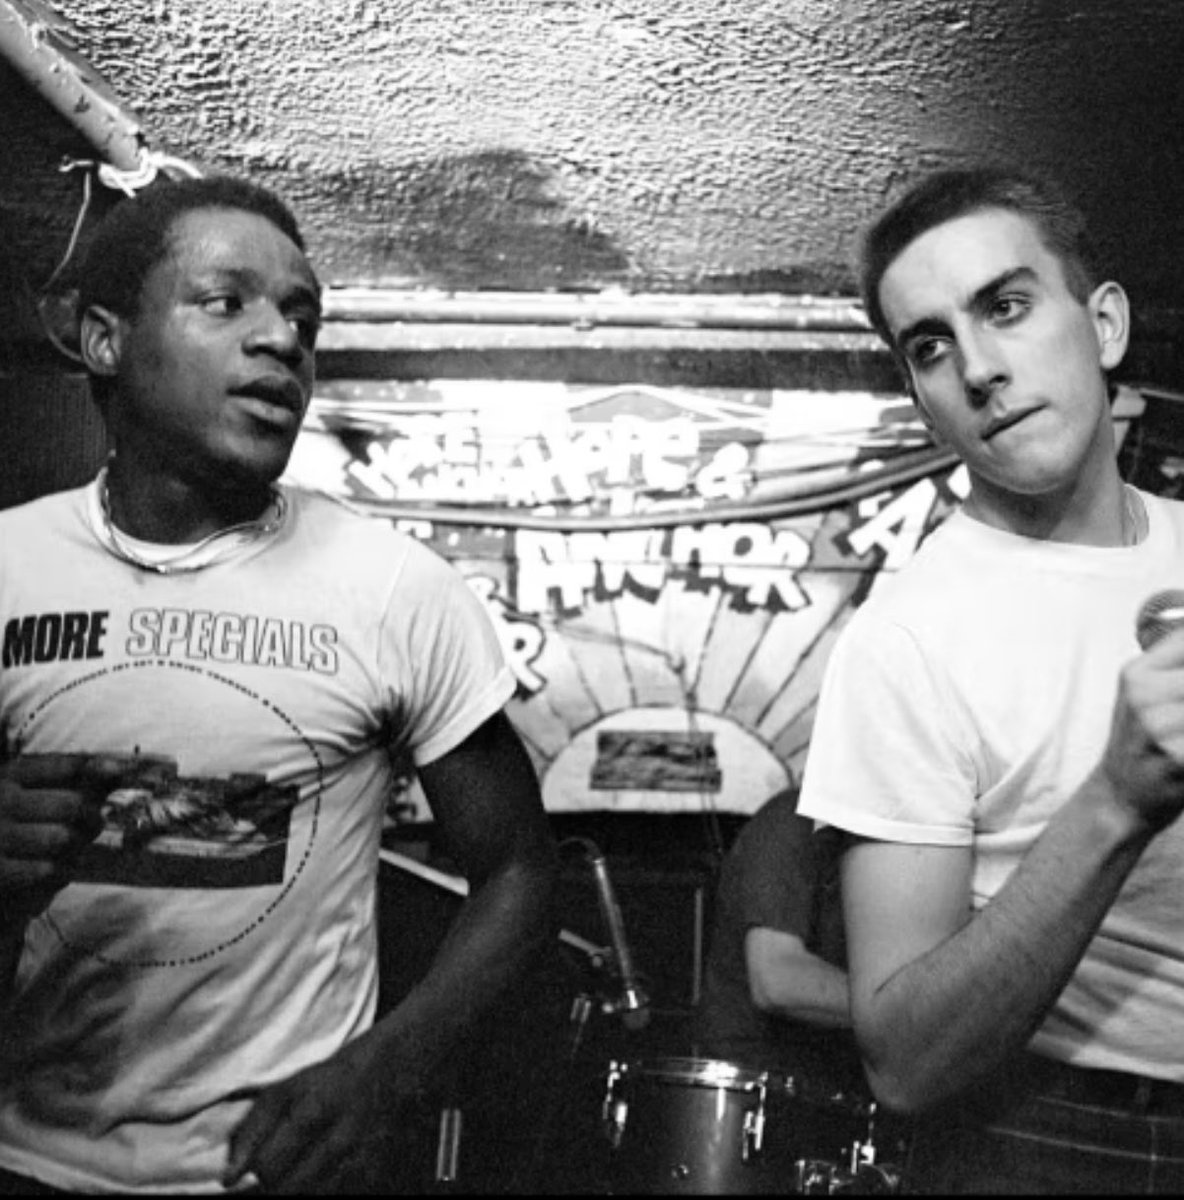 The protest soundtrack to our youth & the blueprint of our band. Rest in power Terry Hall.